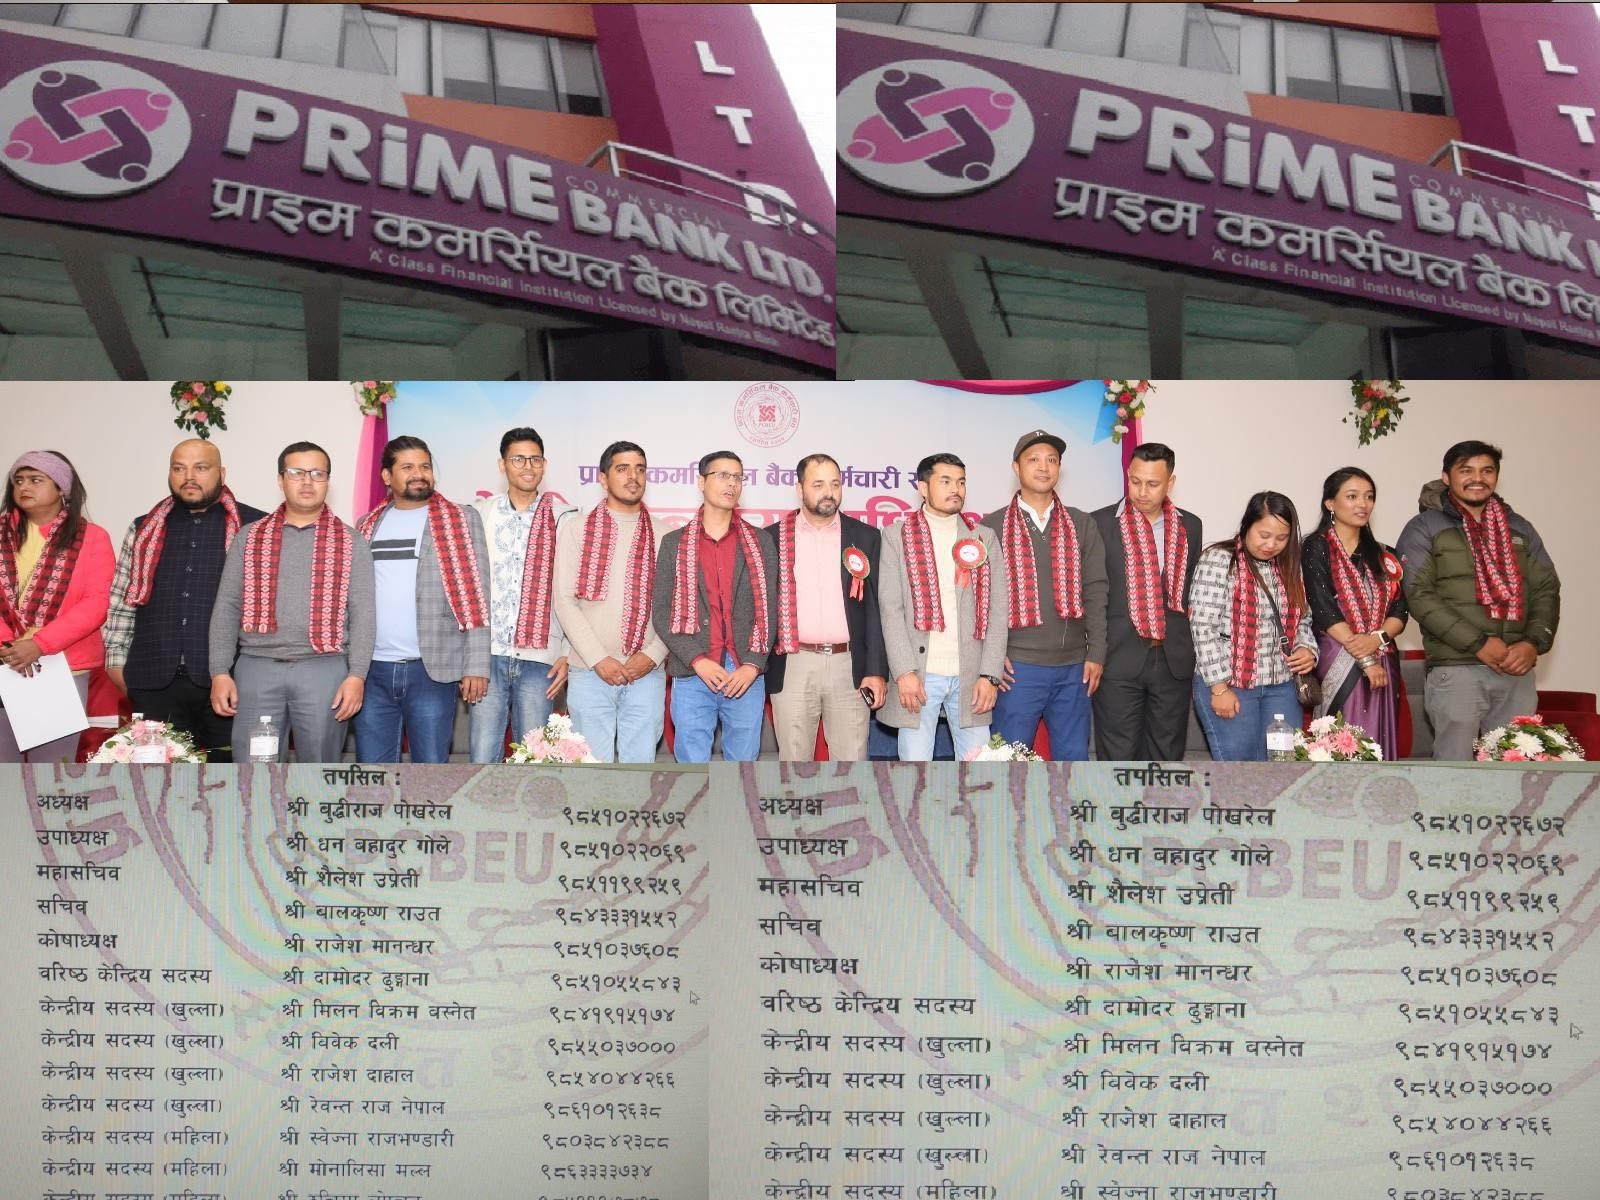 Buddhiraj Pokharel chairmanship  make a new committees of Prime Commercial Bank Employees Association